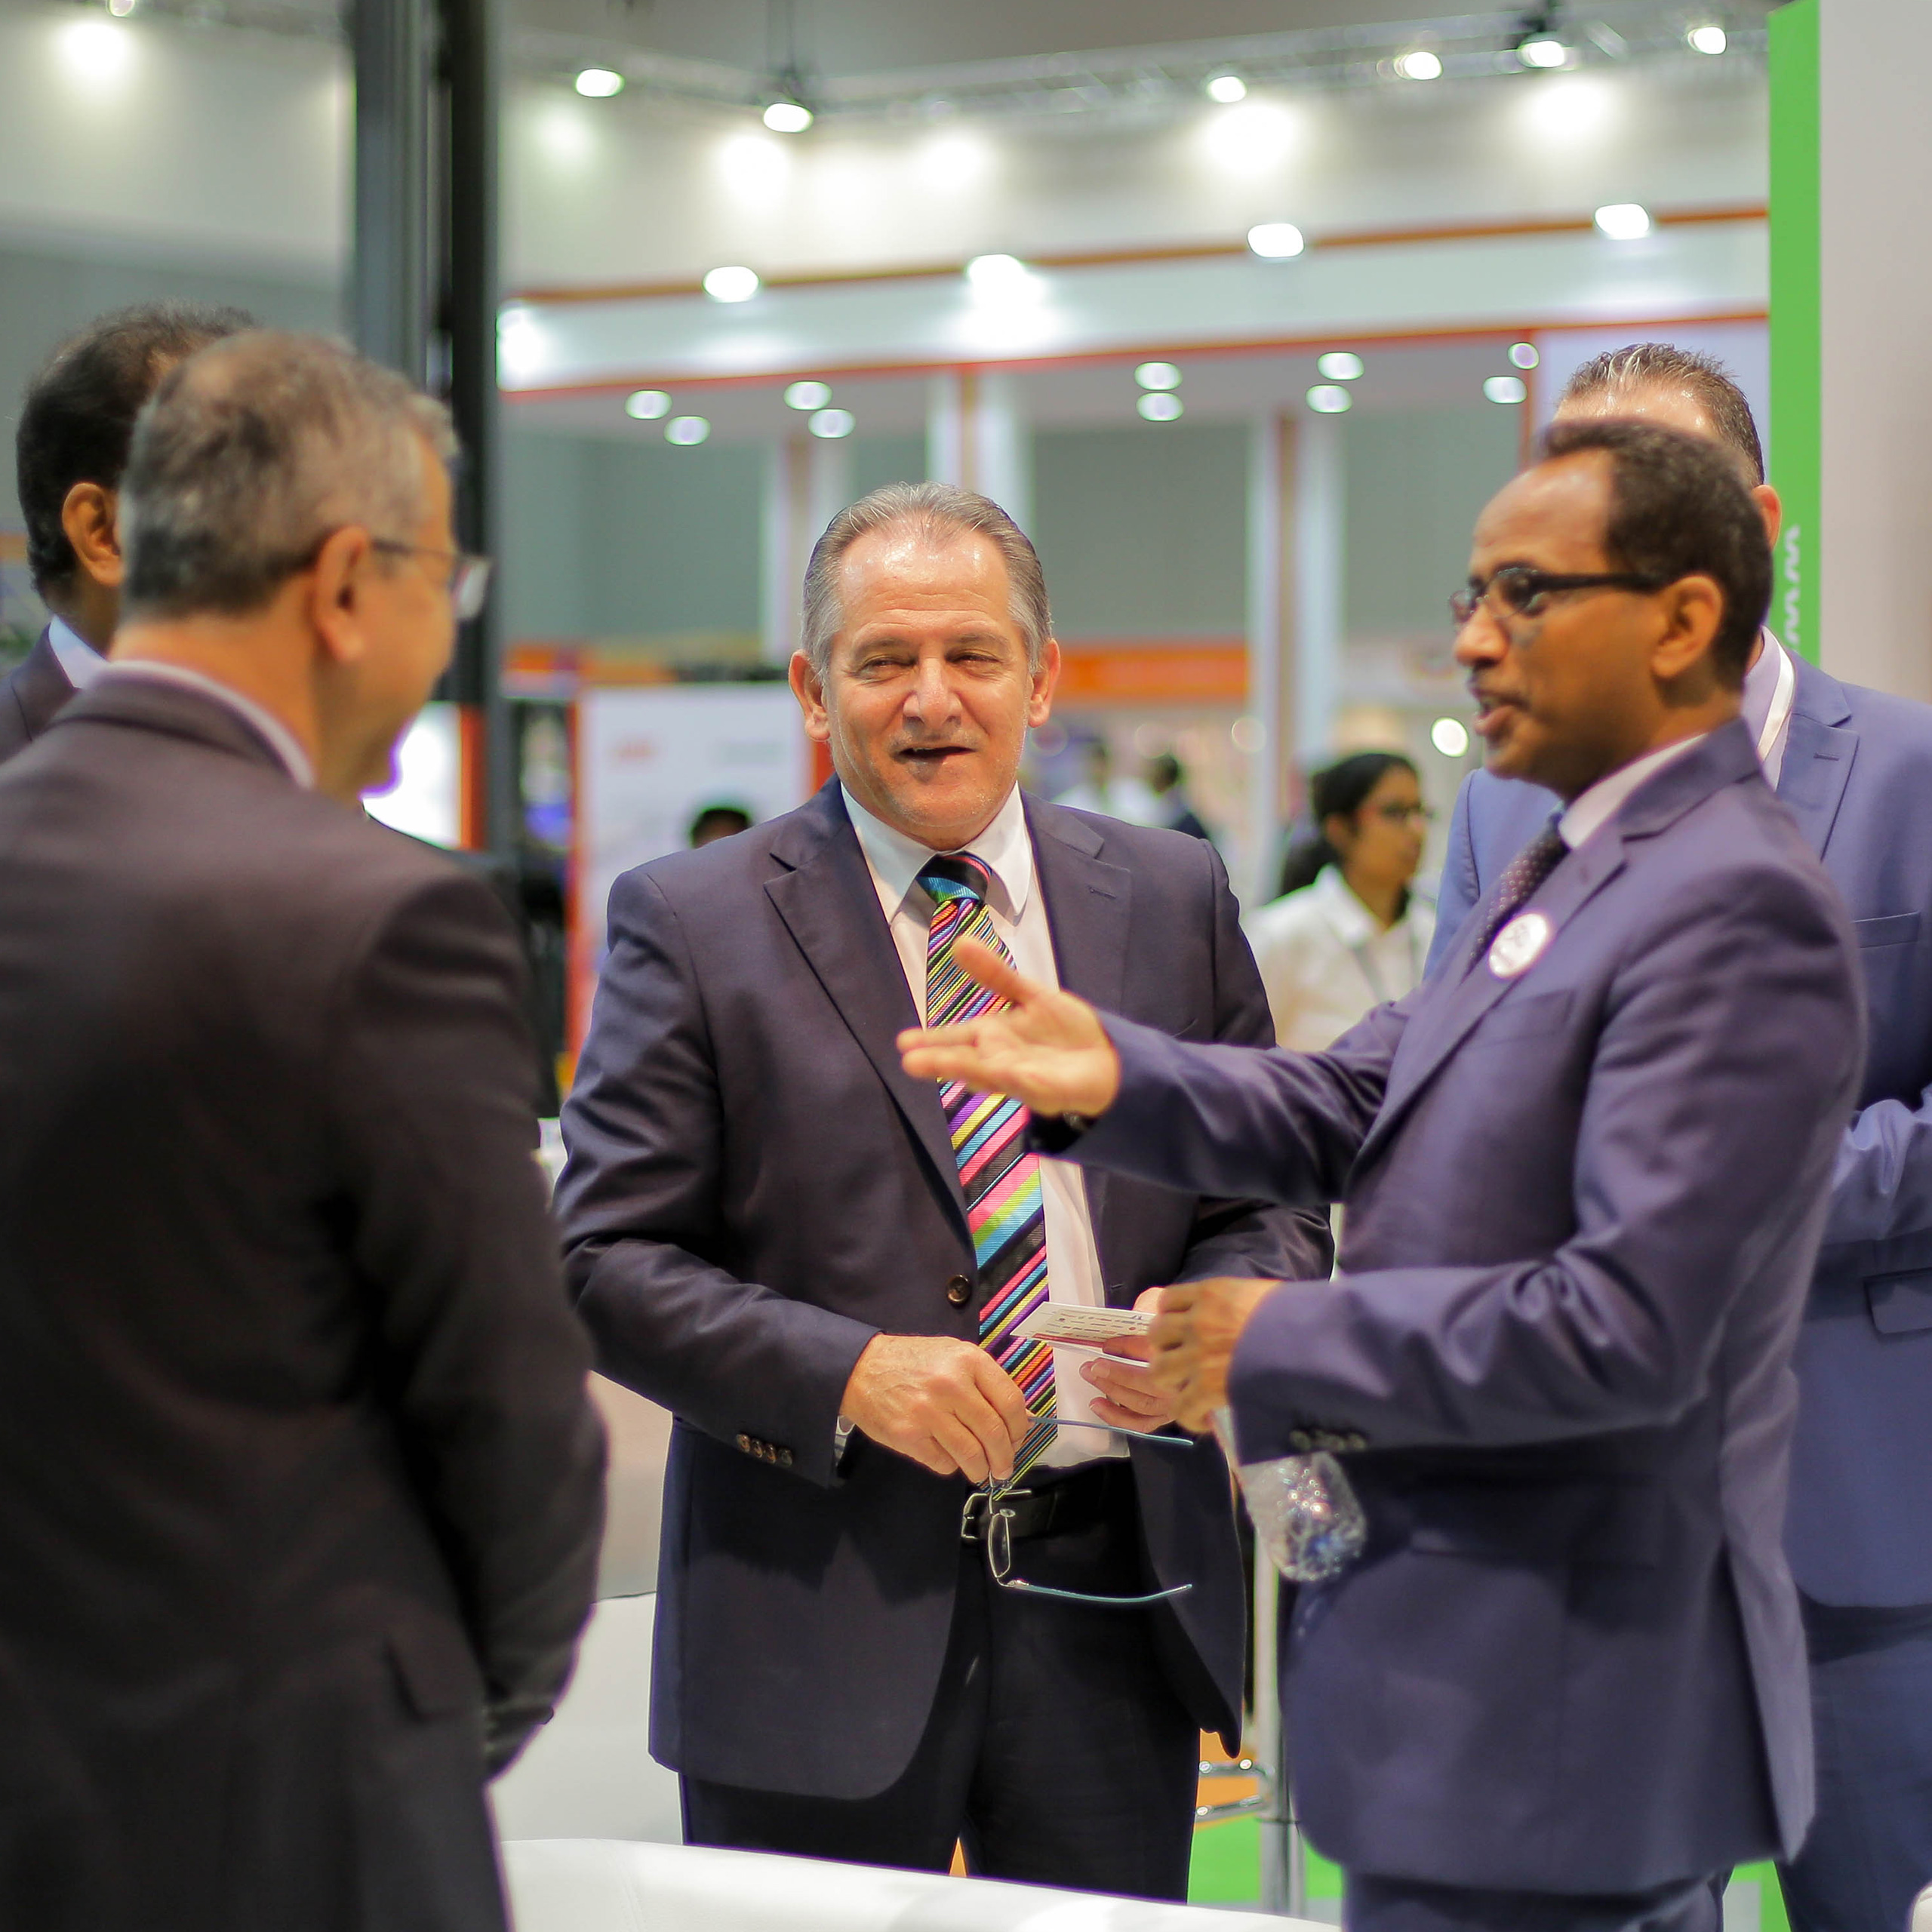 Materials Handling Middle East - Materials Handling Middle East 2017 concludes in Dubai